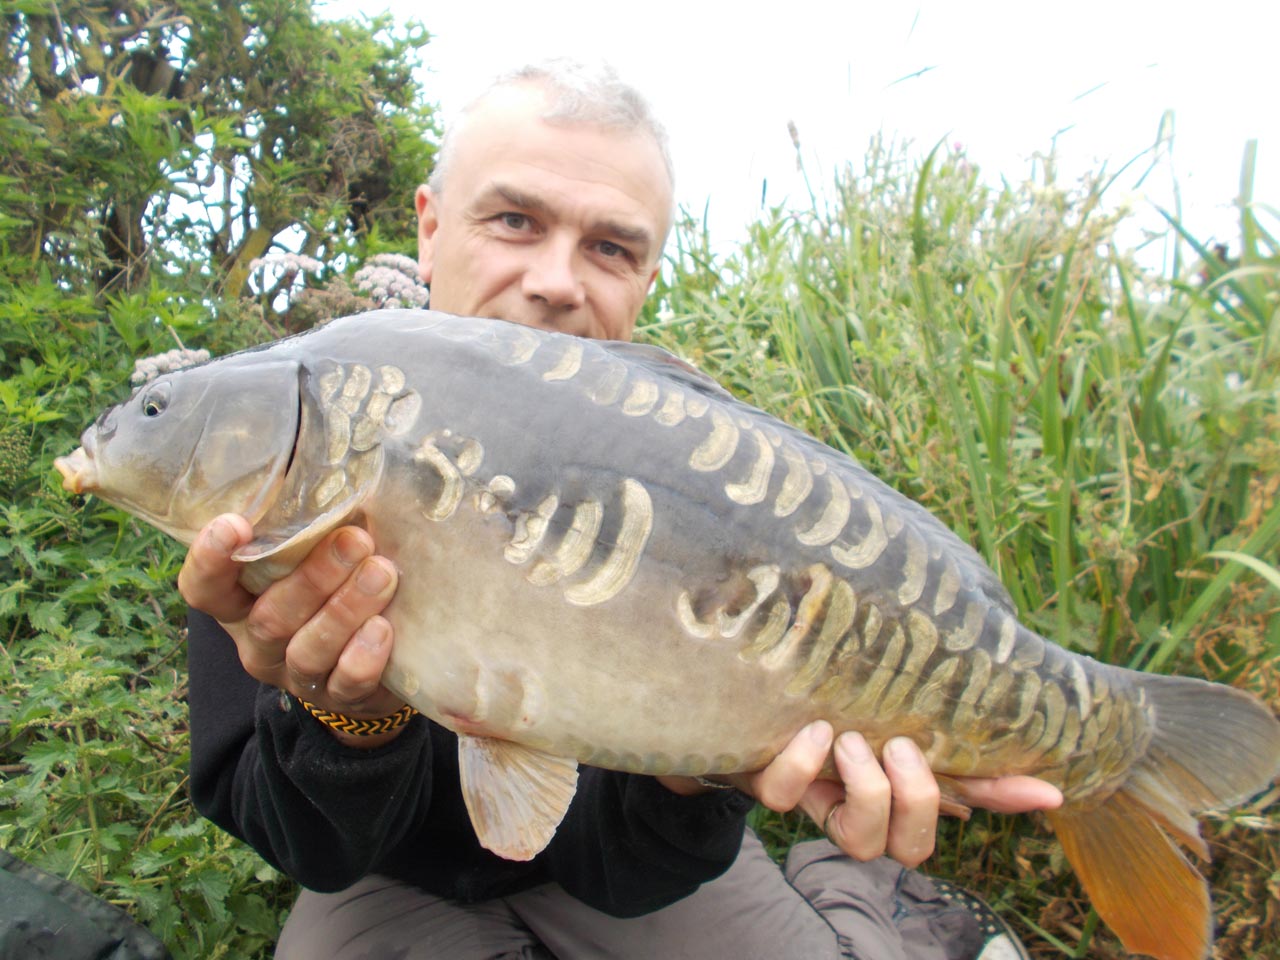 Another great looking fish tempted by SBS